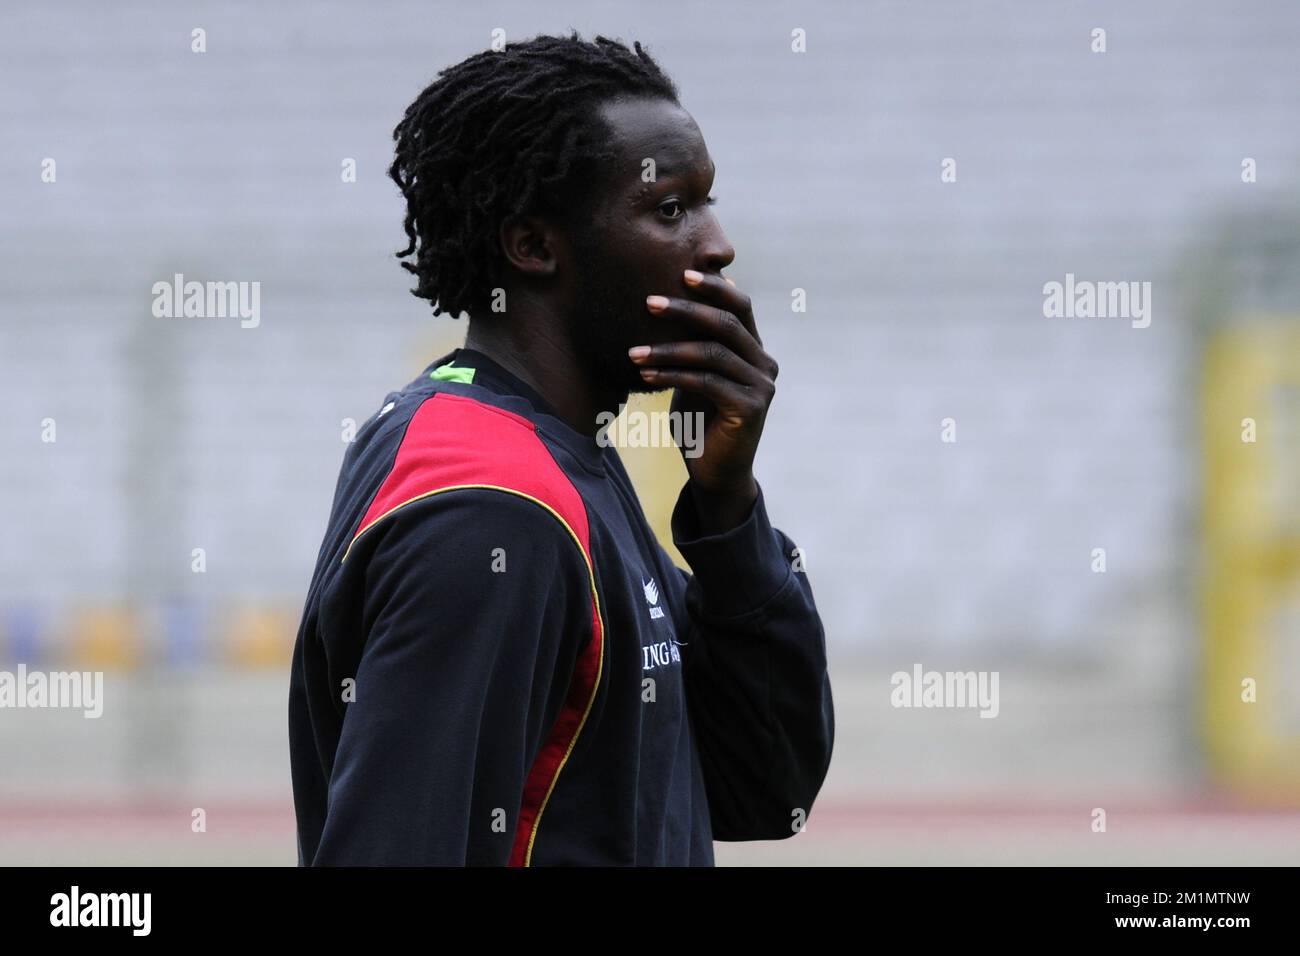 20120531 - BRUSSELS, BELGIUM: Belgium's Romelu Lukaku pictured during a training session of the Red Devils, the Belgian national soccer team, at the Koning Boudewijn Stadion - Stade Roi Baudouin, in Brussels, Thursday 31 May 2012. The team is preparing for a friendly game against England, on 02 June 2012. BELGA PHOTO DIRK WAEM Stock Photo